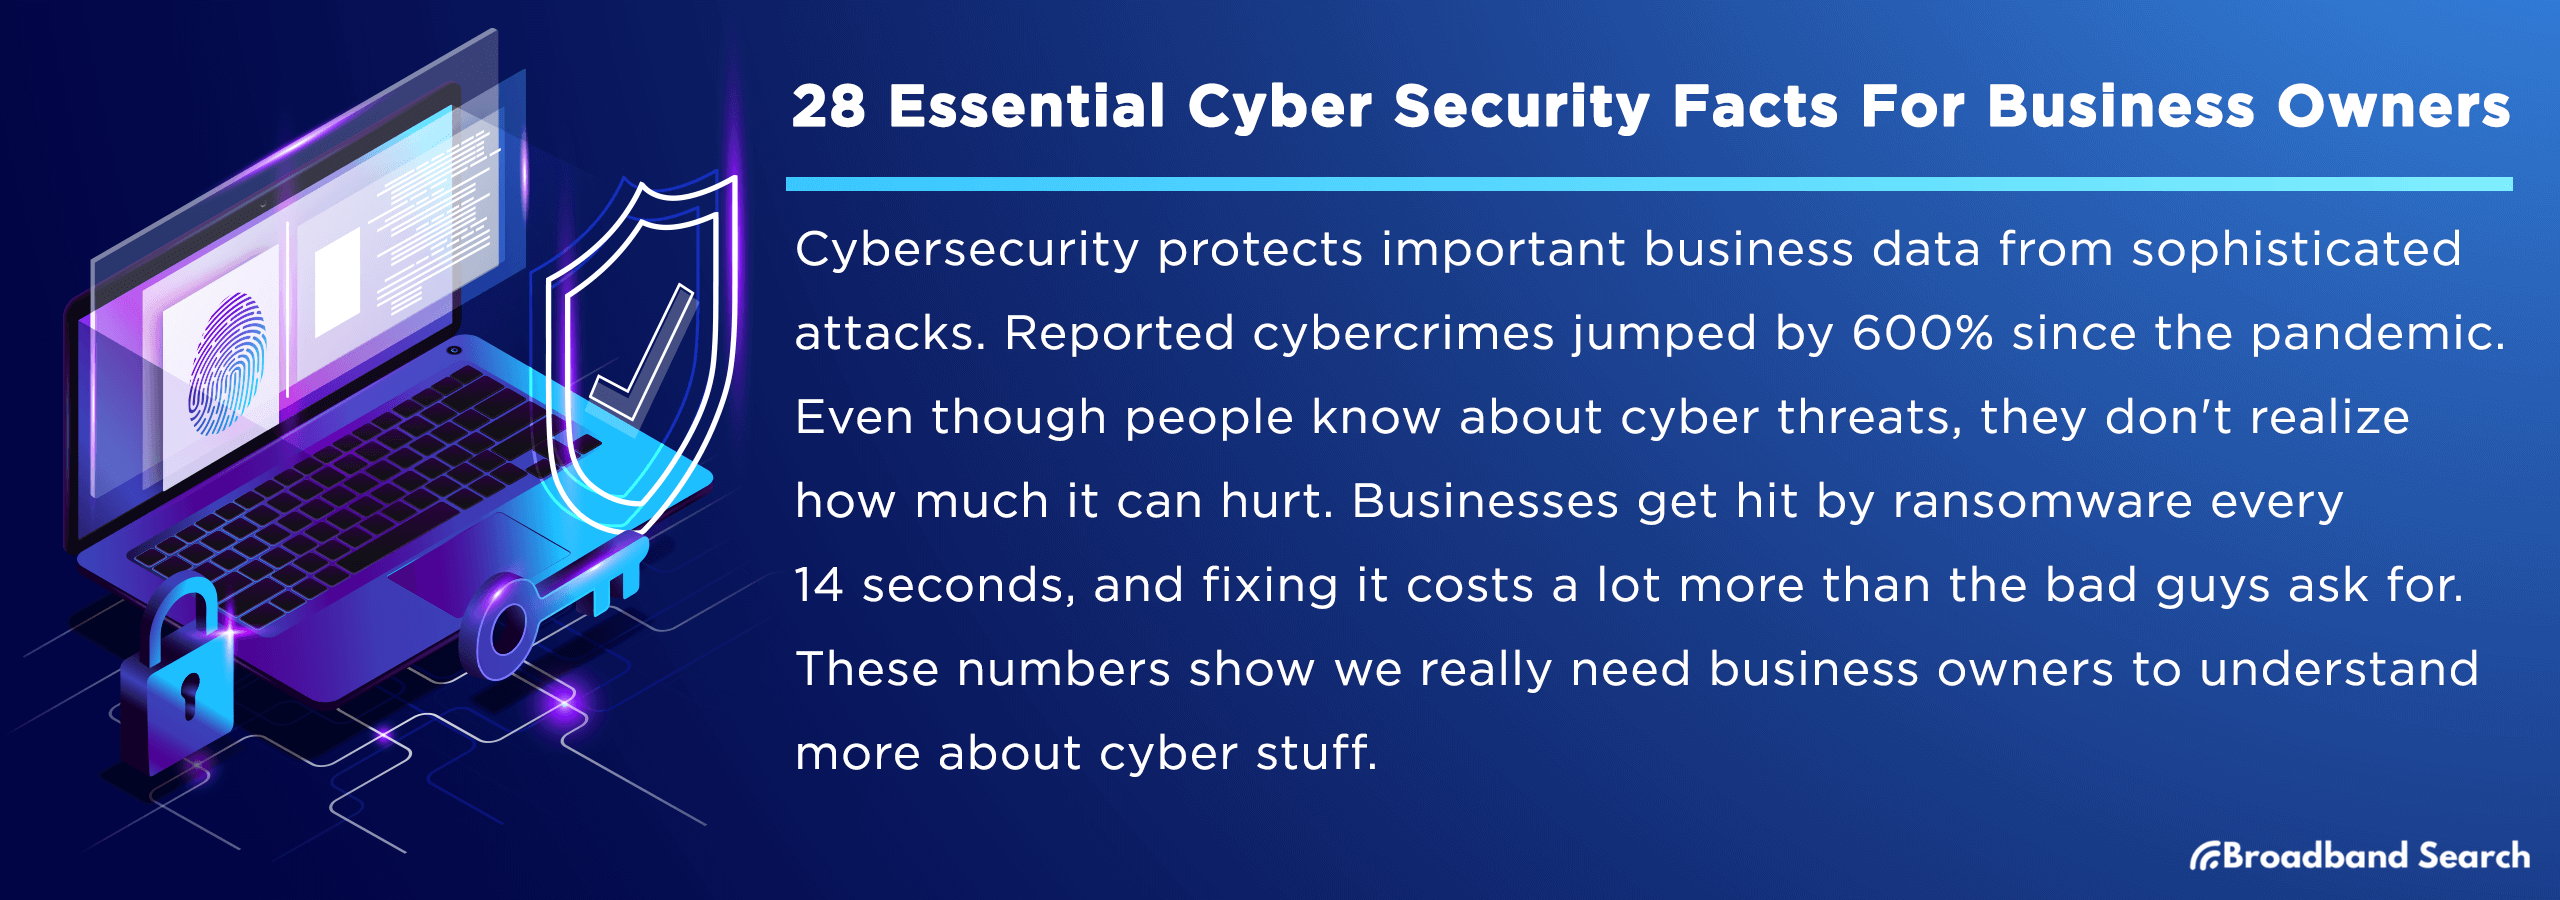 28 Essential Cyber Security Facts For Business Owners